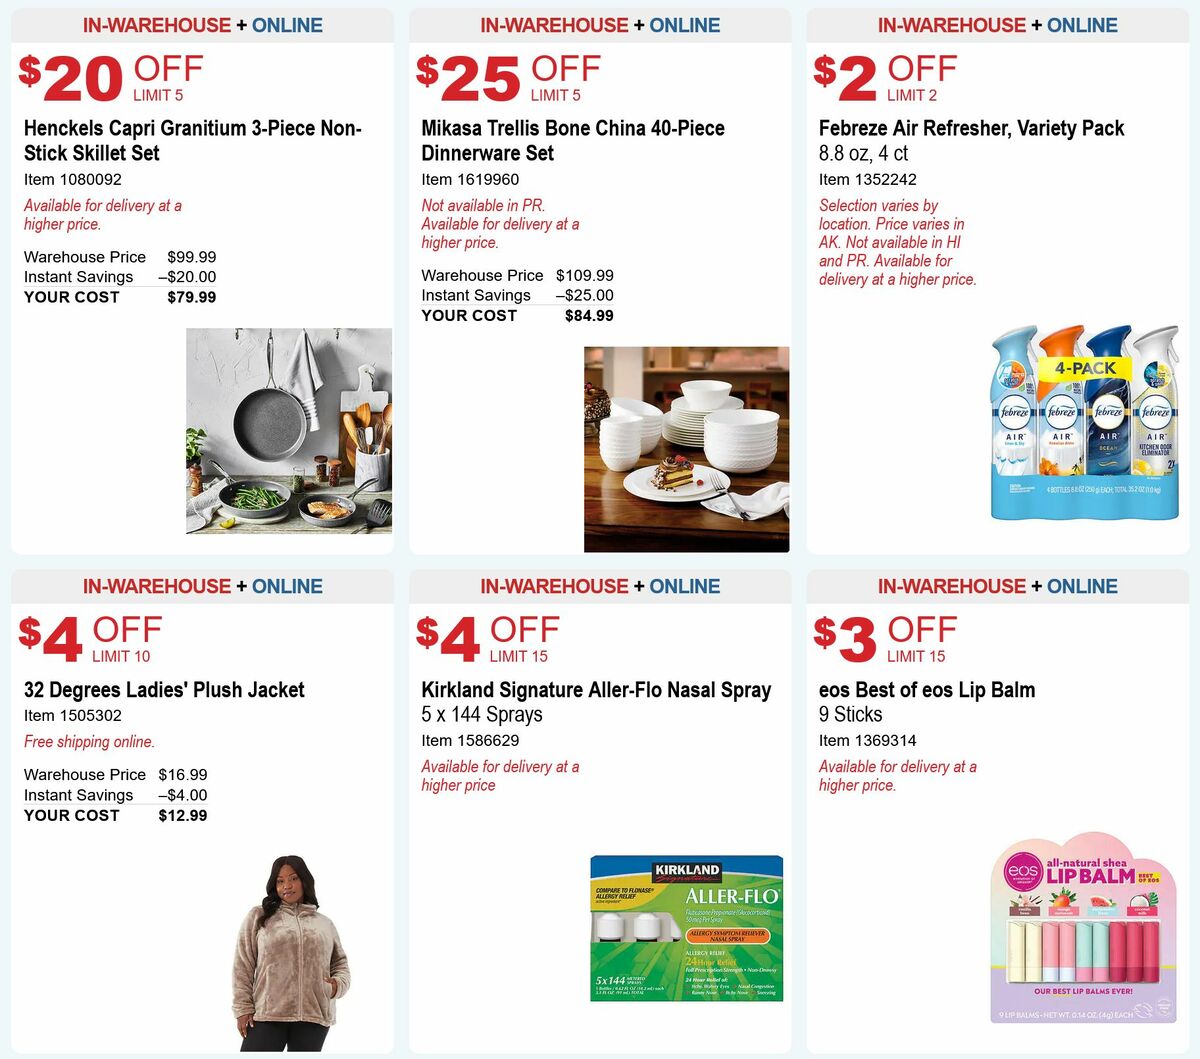 Costco Hot Buys Weekly Ad from November 11